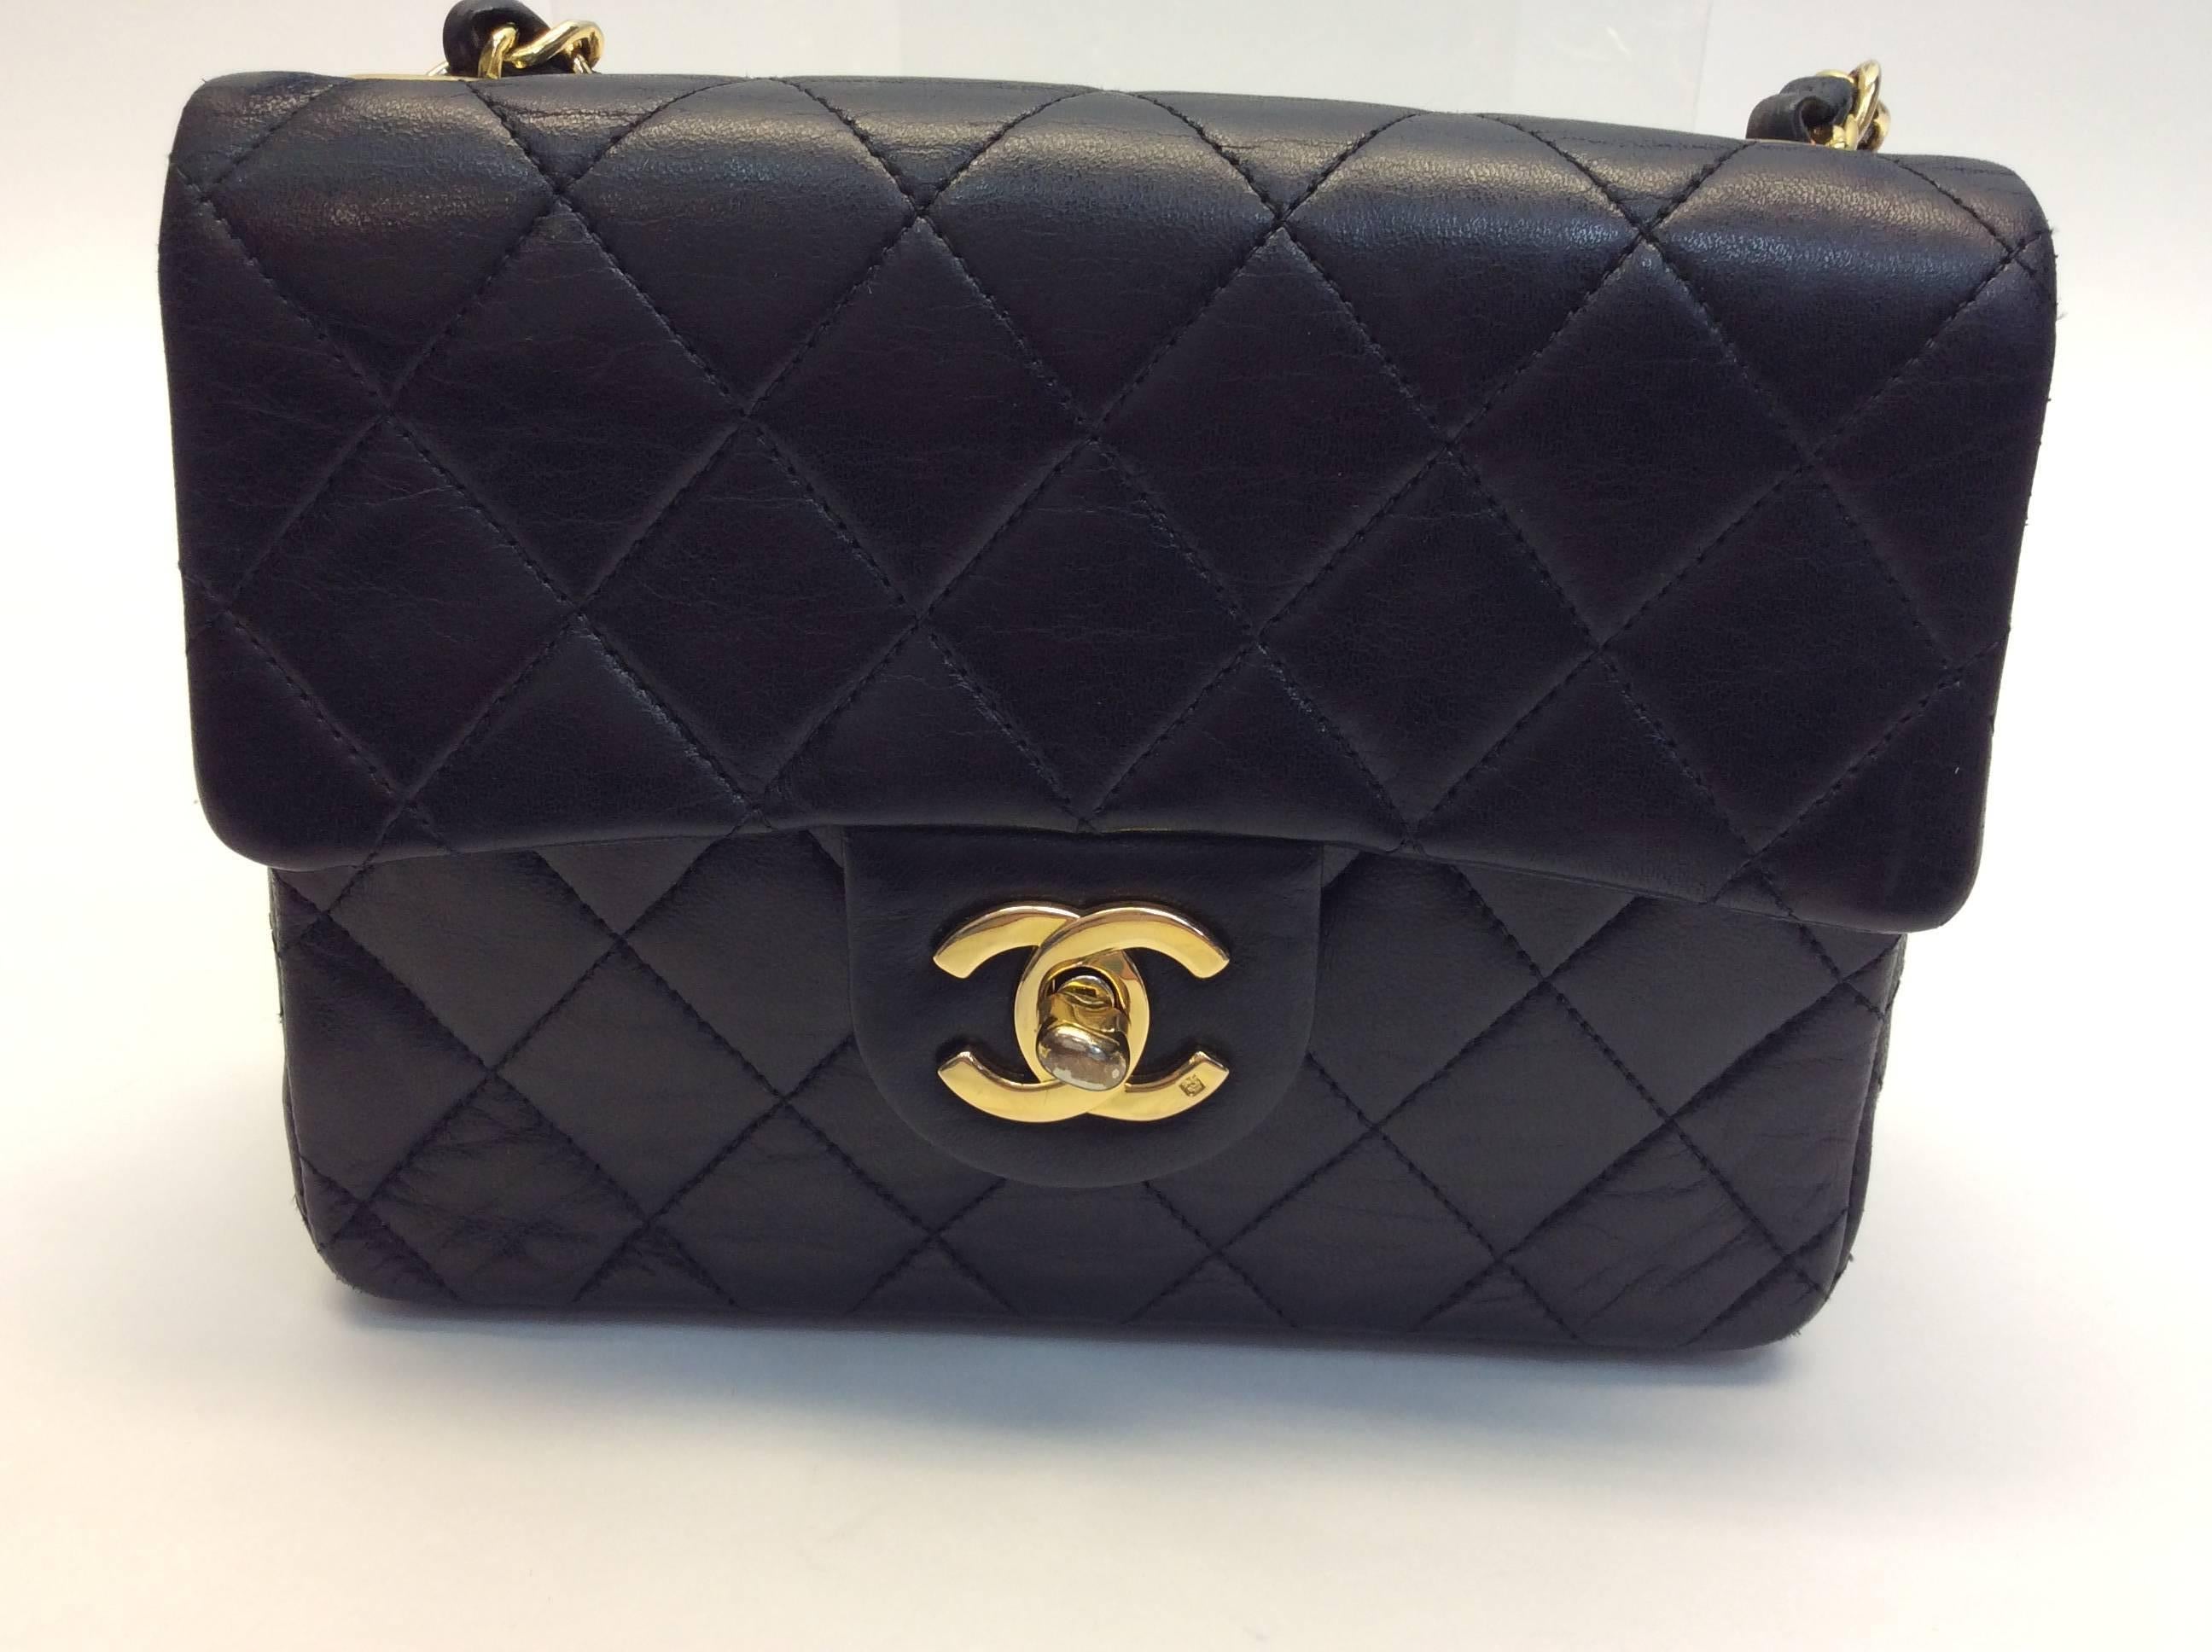 Chanel Black Leather Mini Flap Purse
$2200
Leather
Made in Italy
7